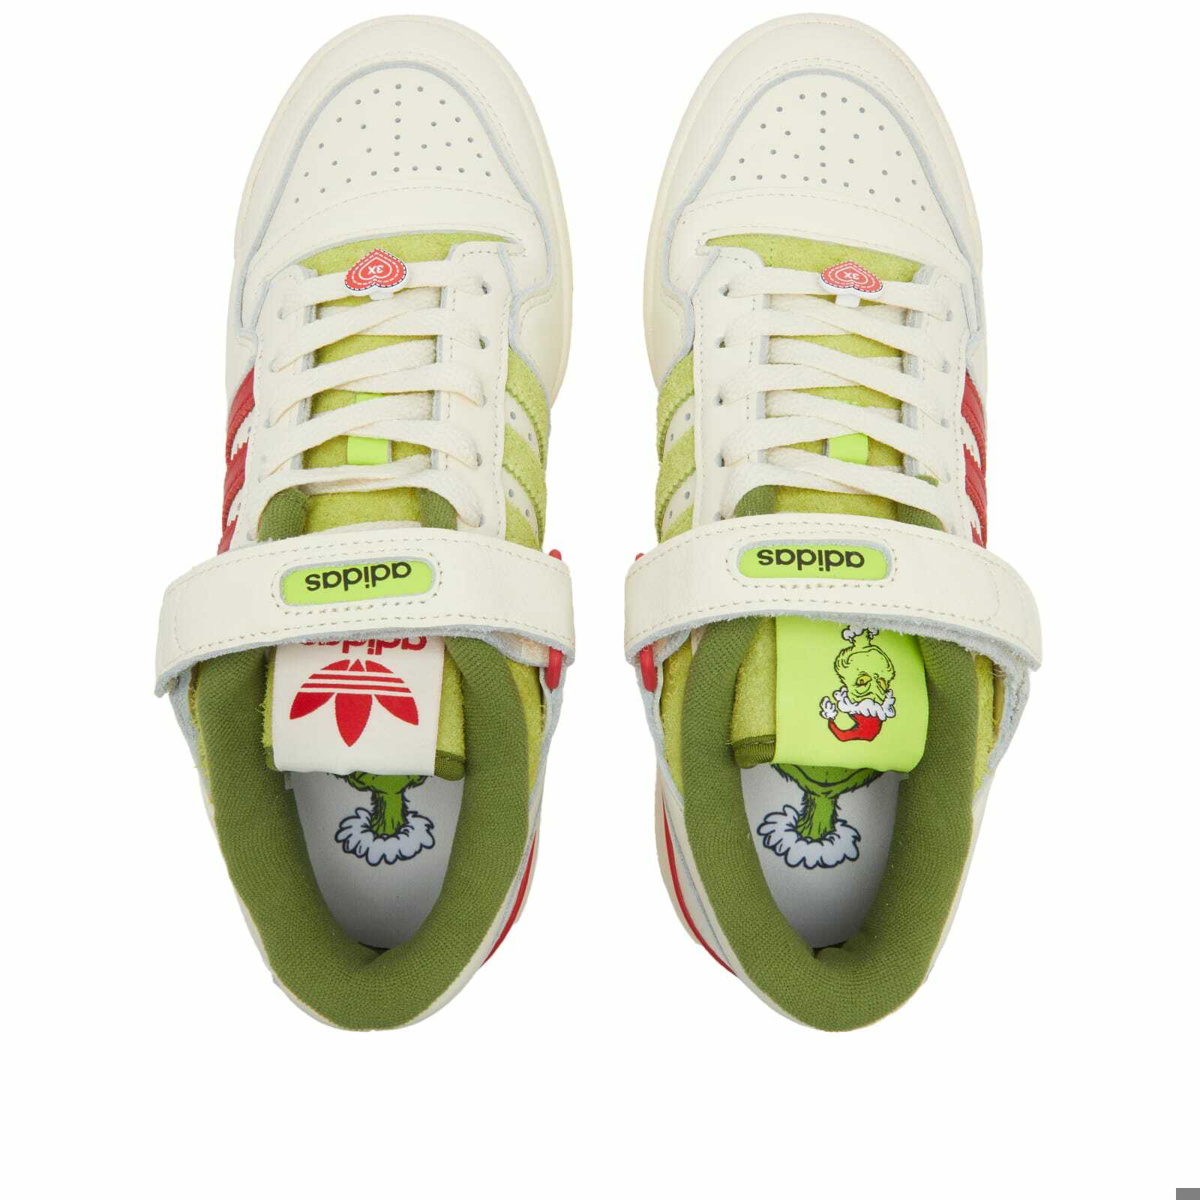 Adidas Forum Low 'The Grinch' Sneakers in White/Red/Solar Slime adidas